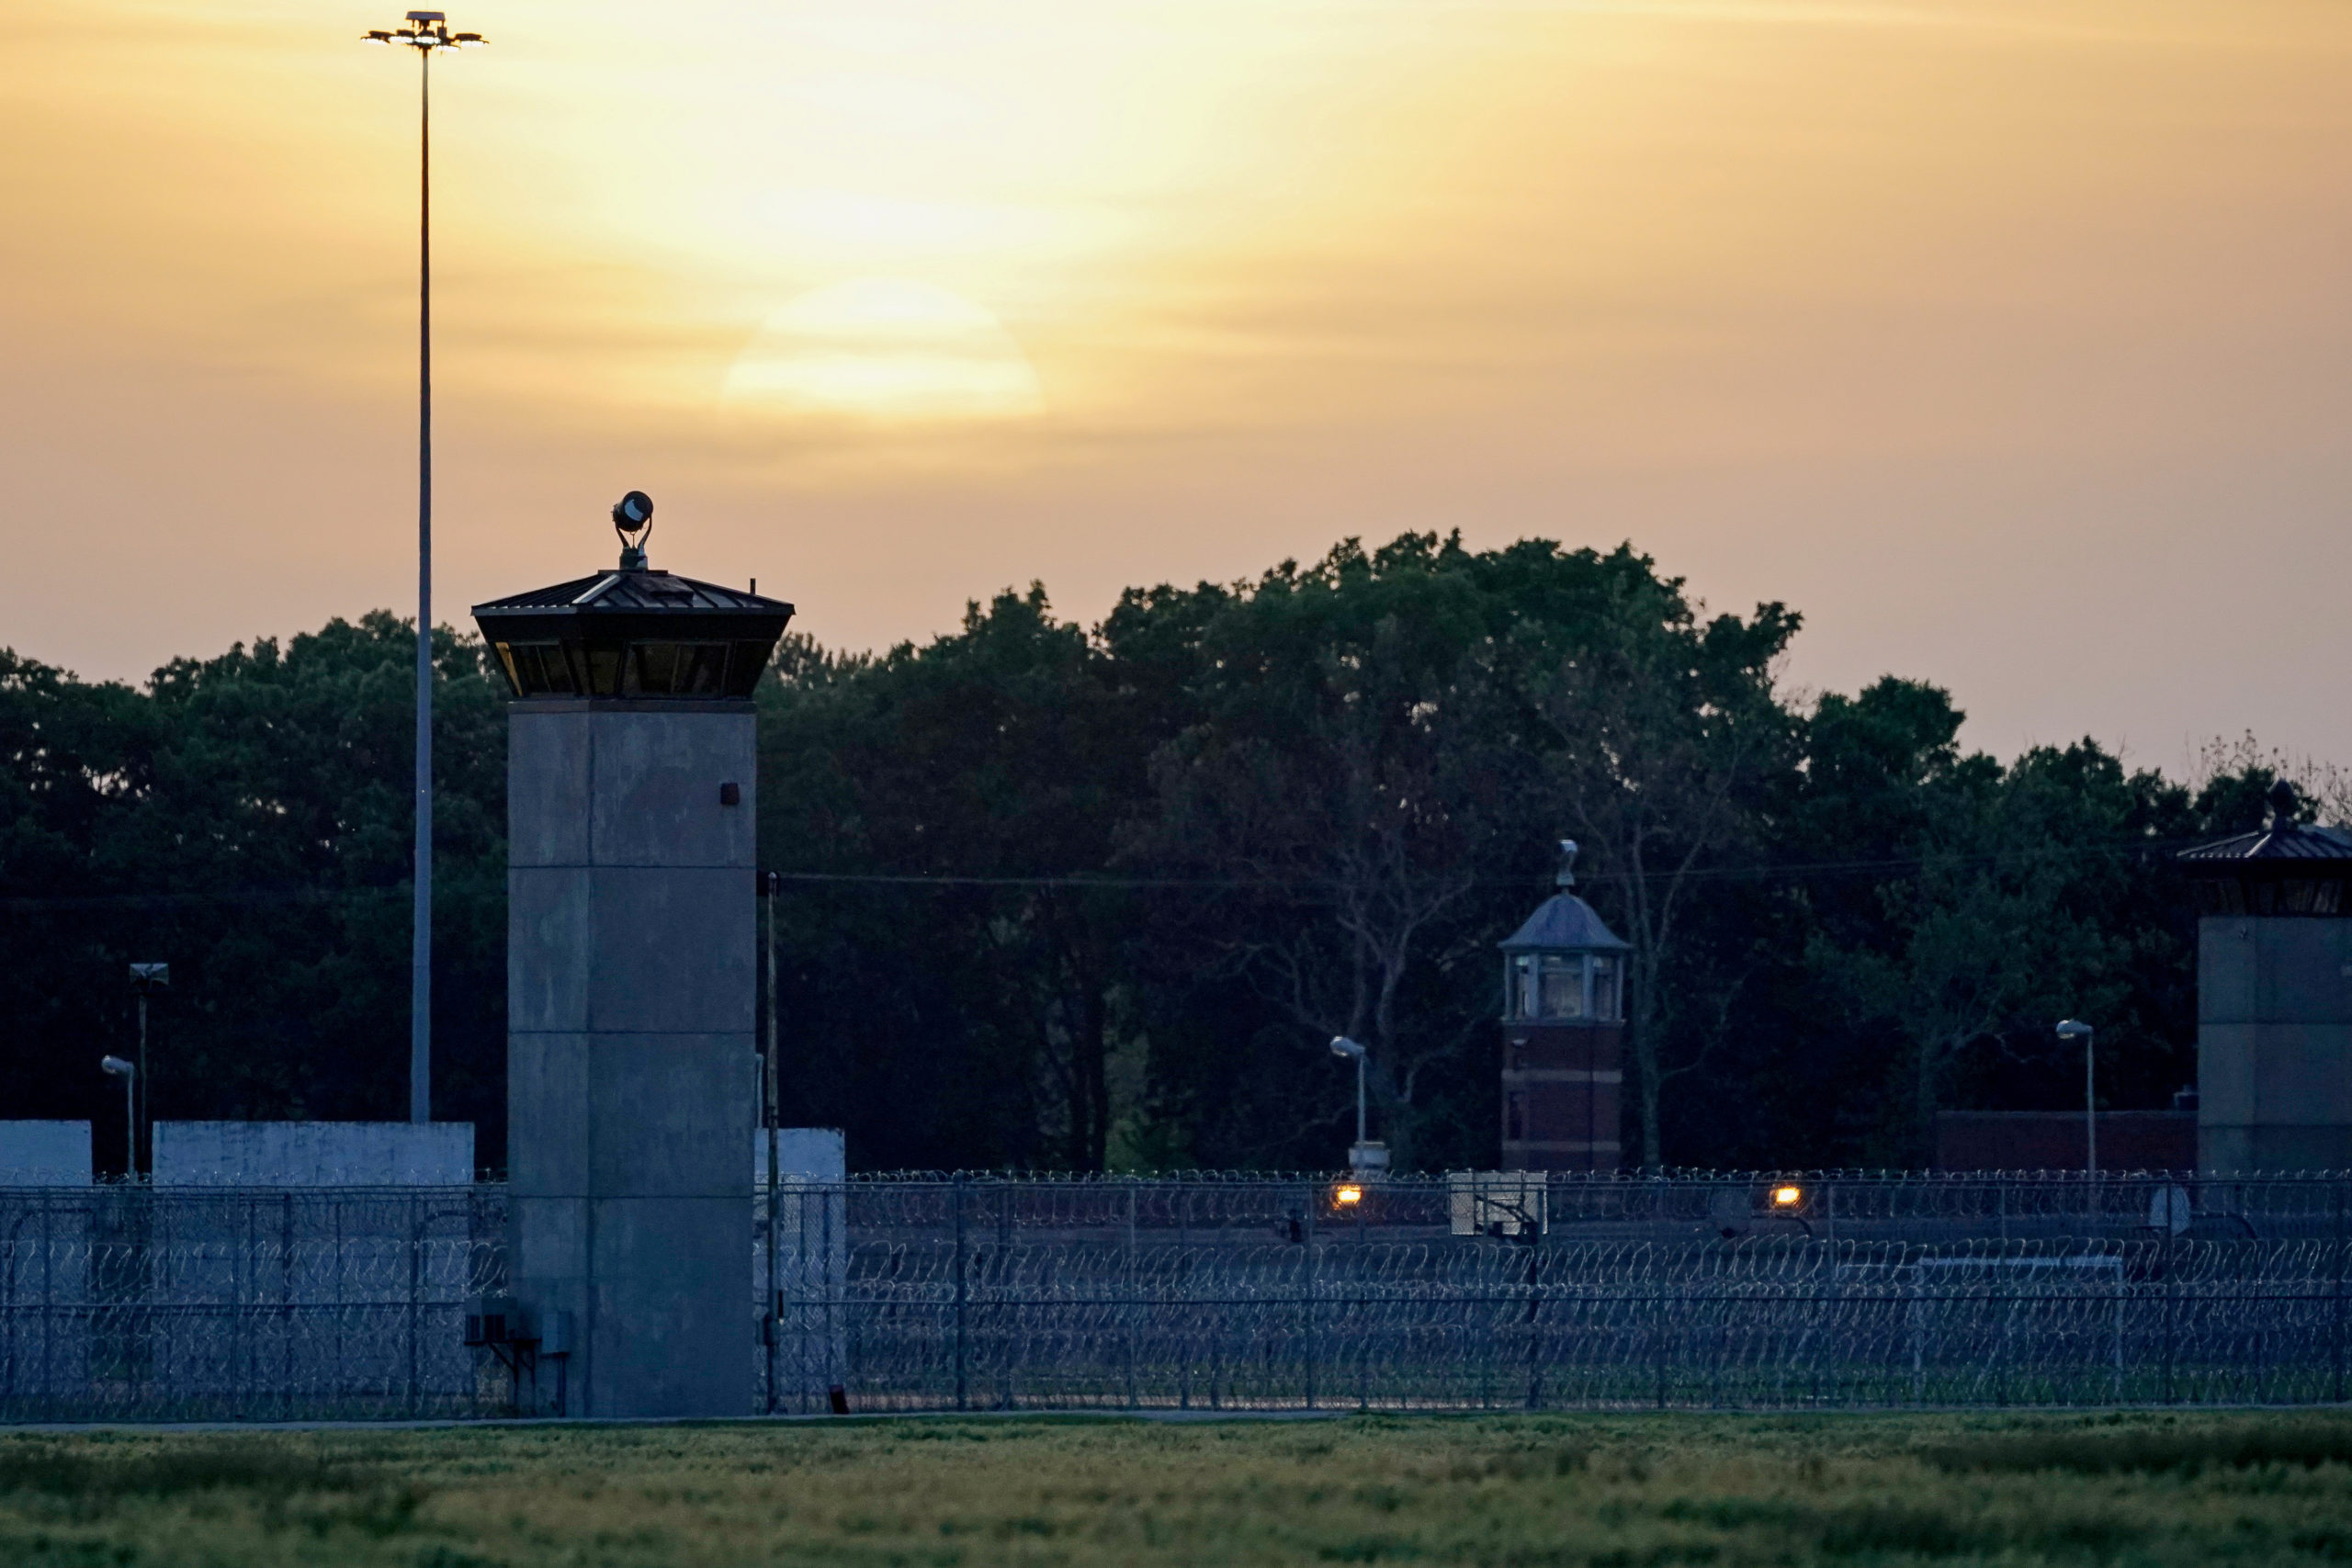 The Federal Corrections Complex in Terre Haute, Indiana where Lezmond Mitchell was executed Wednesday. (Bryan Woolston/Reuters/File Photo)